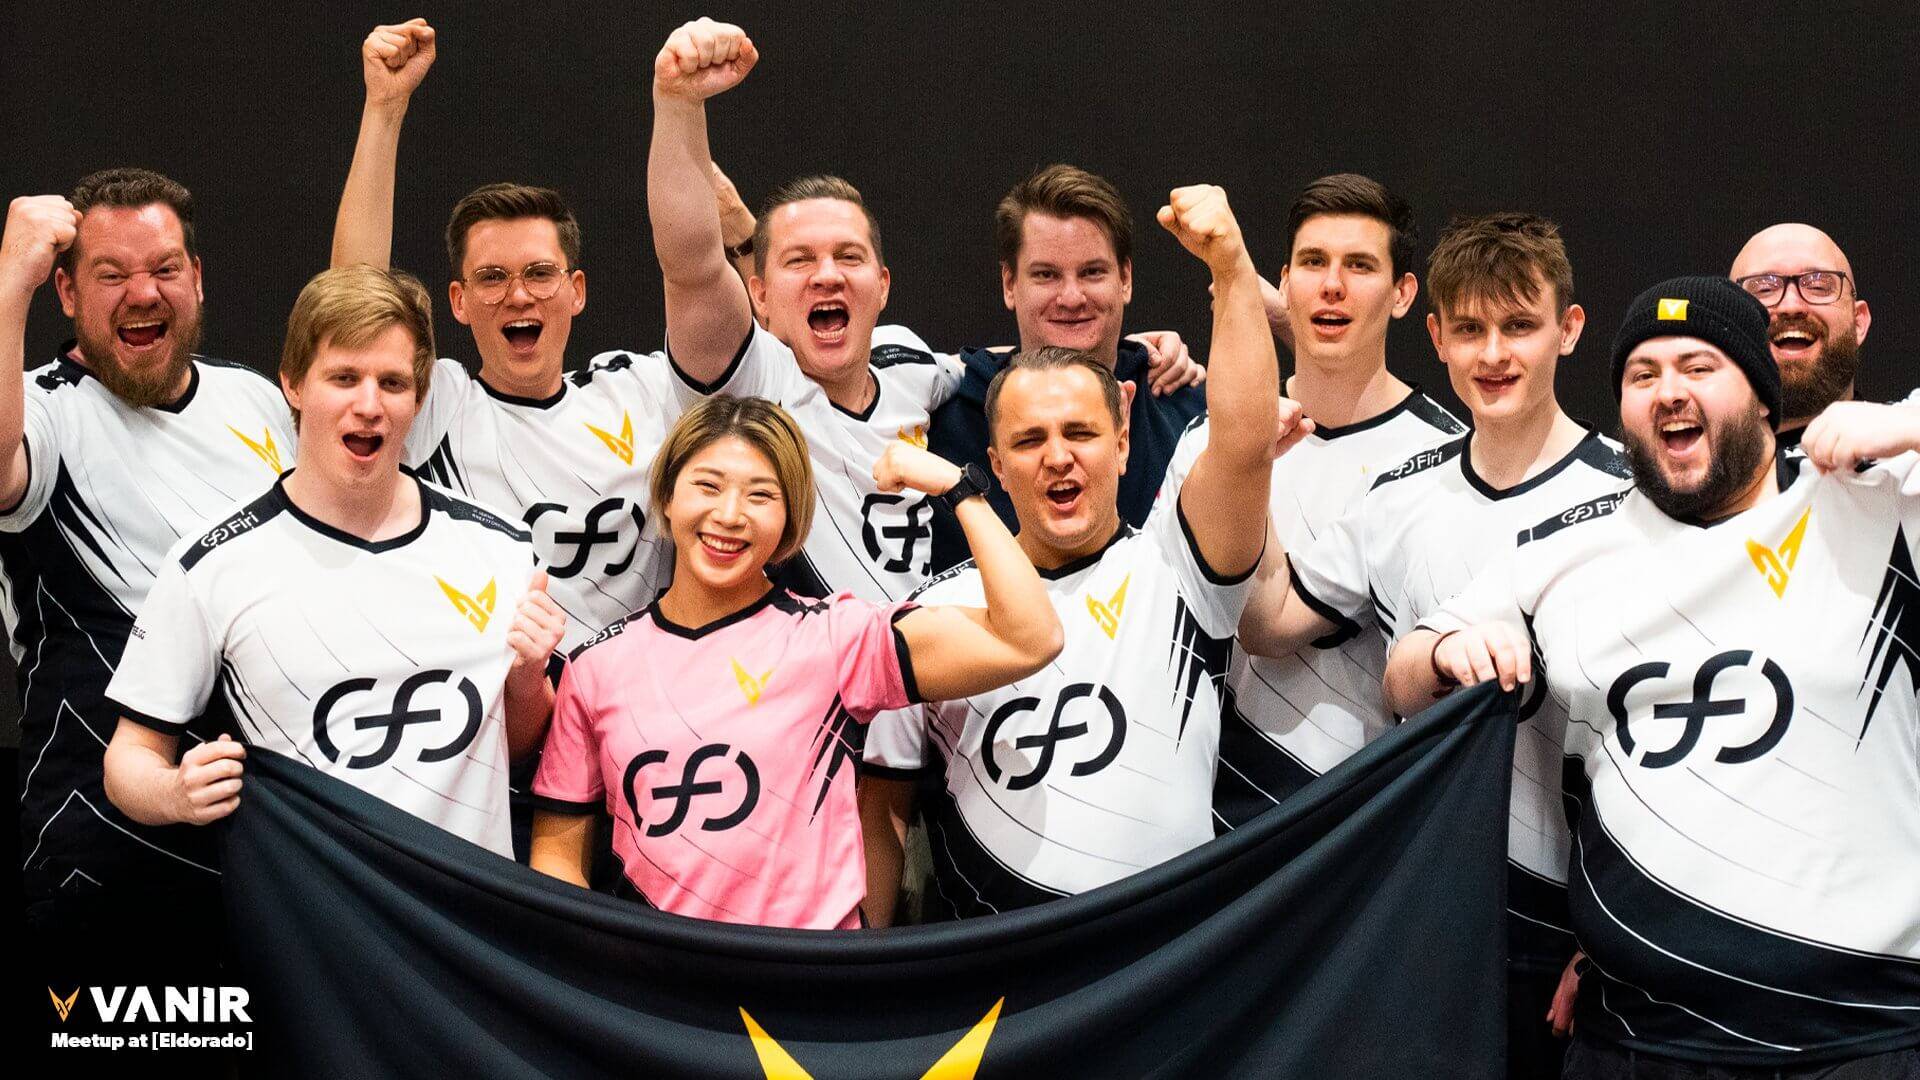 Esports Team with custom esports jerseys and flags